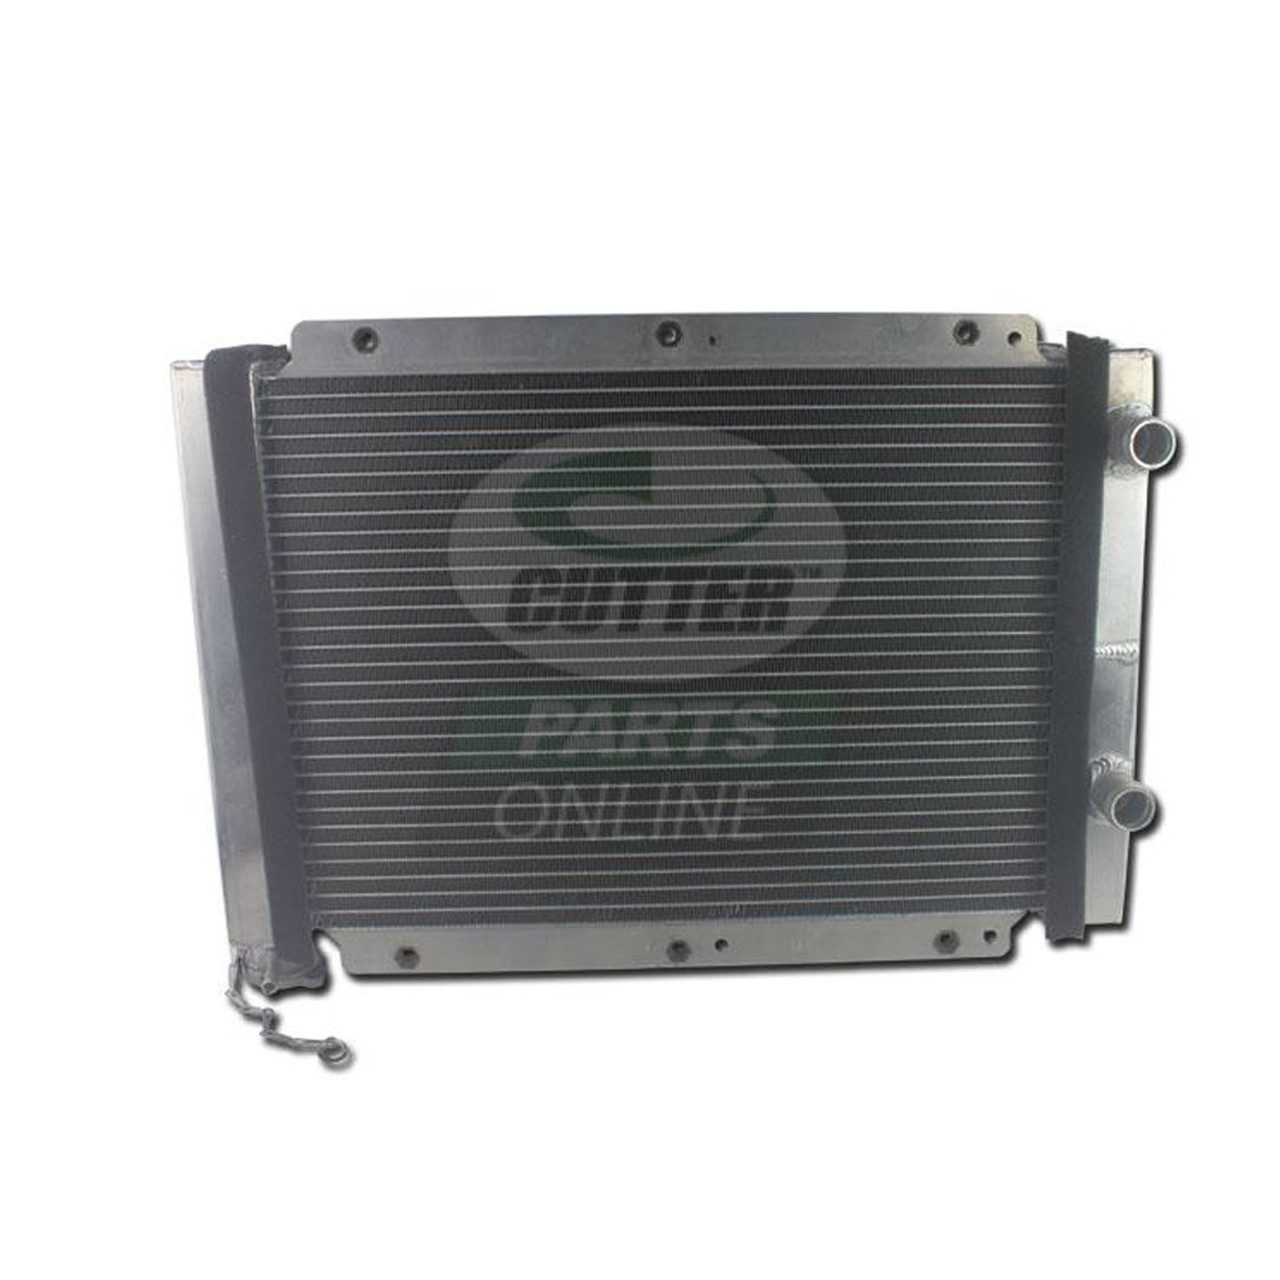 New Radiator Assembly - Replaces Toro 120-4977